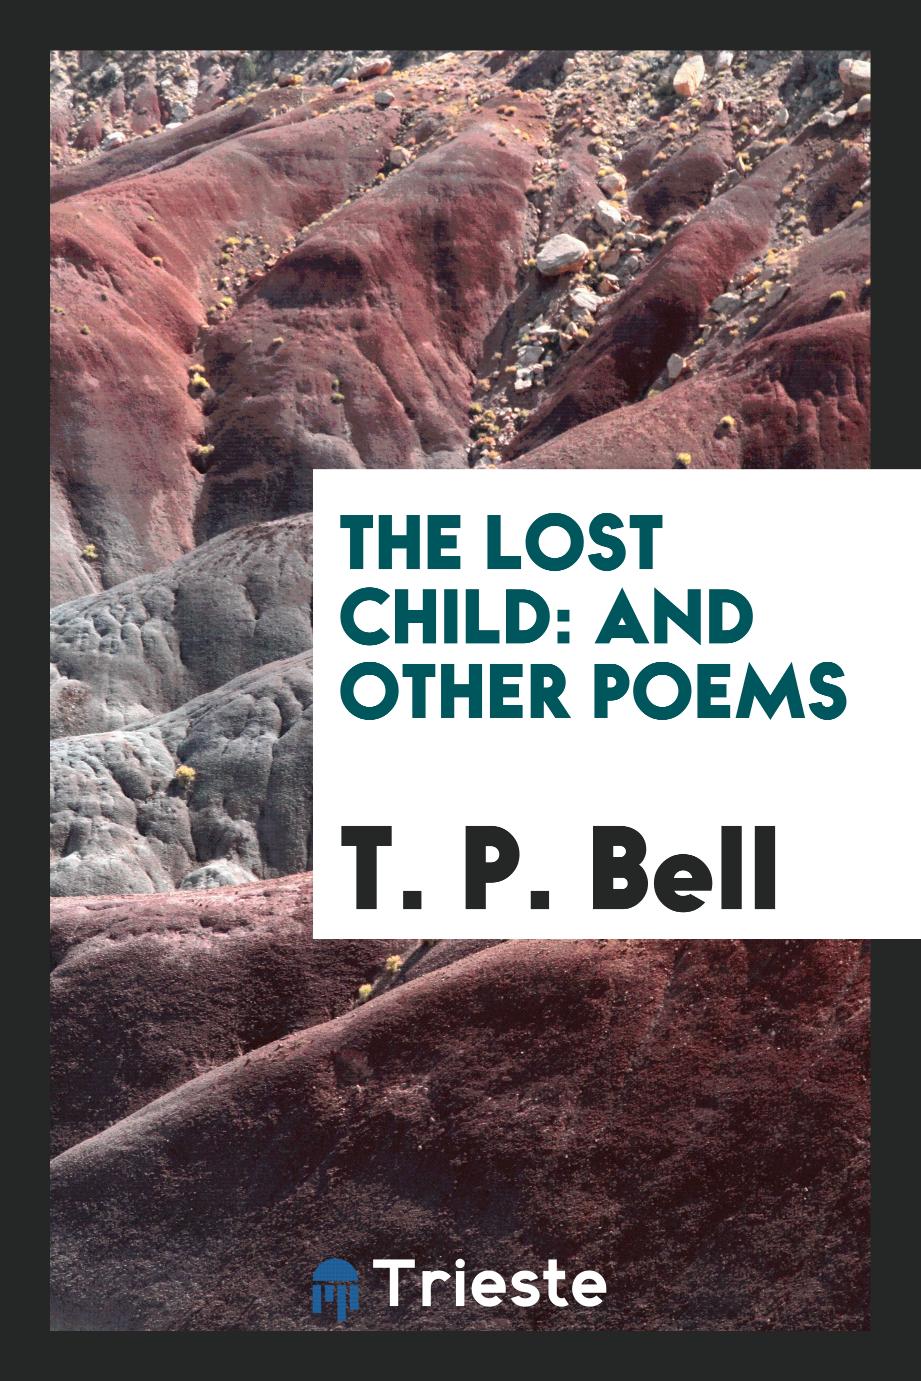 The Lost Child: And Other Poems